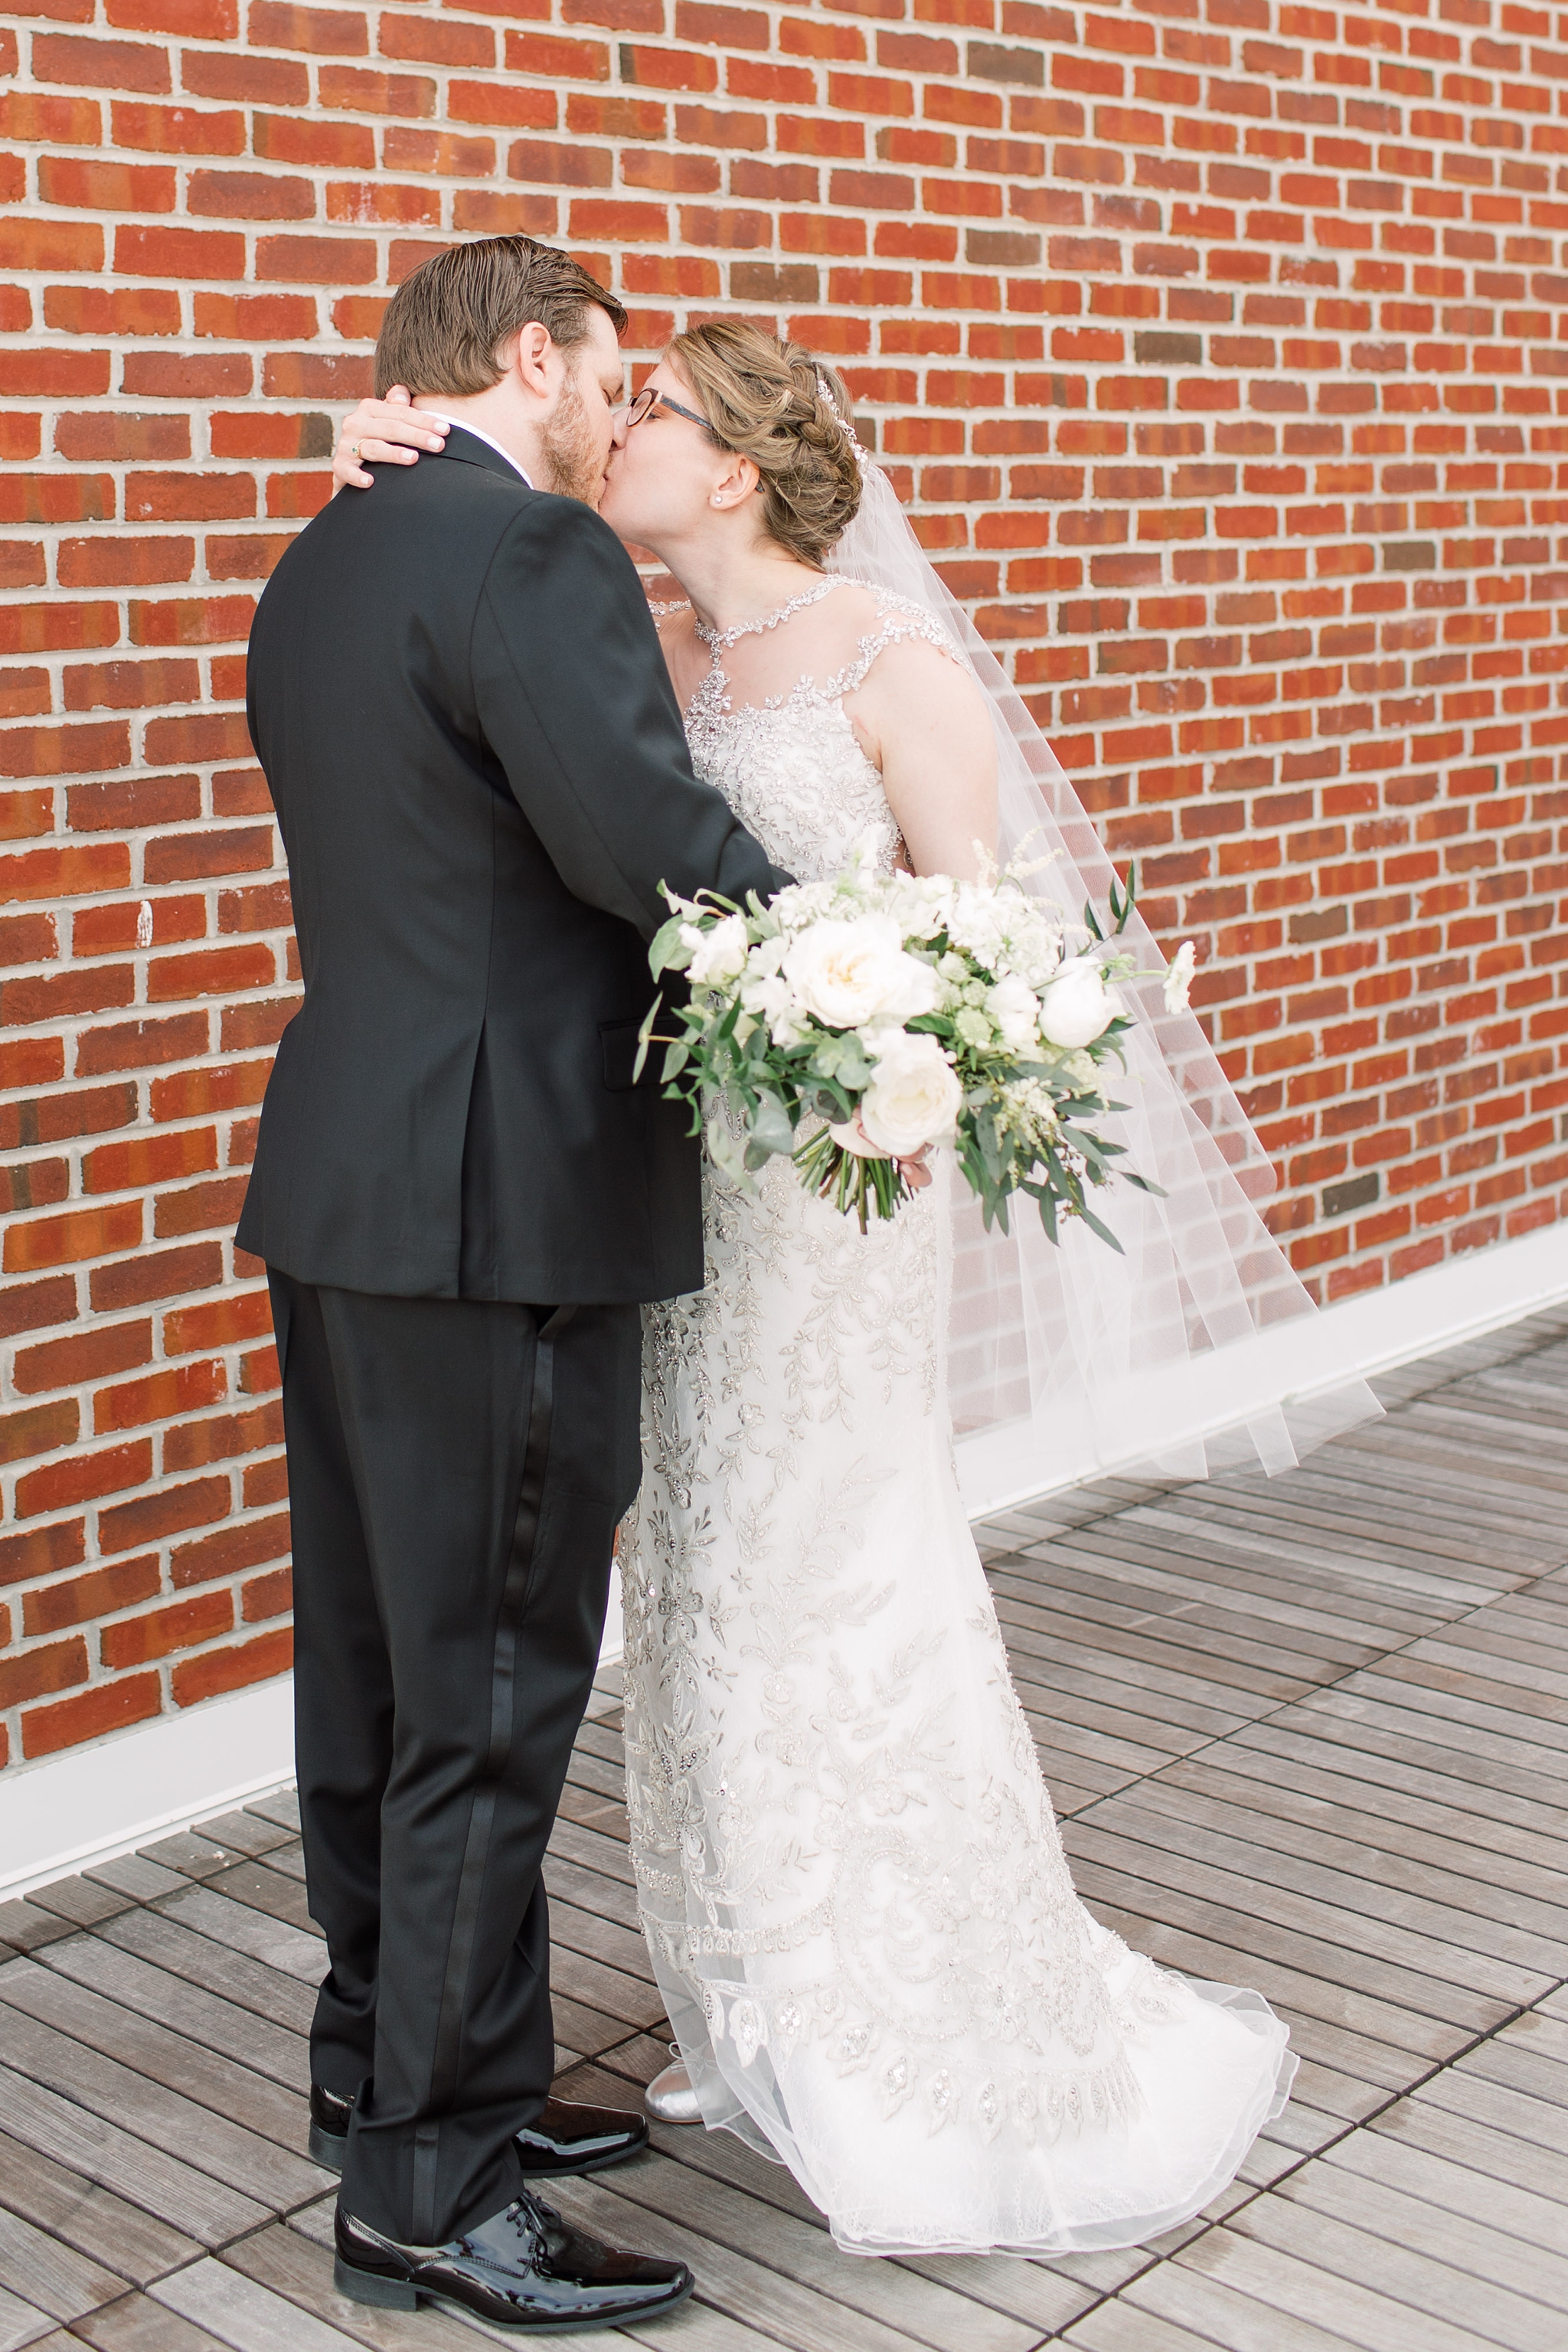 A classic wedding at The LINE Hotel in downtown Washington, DC.